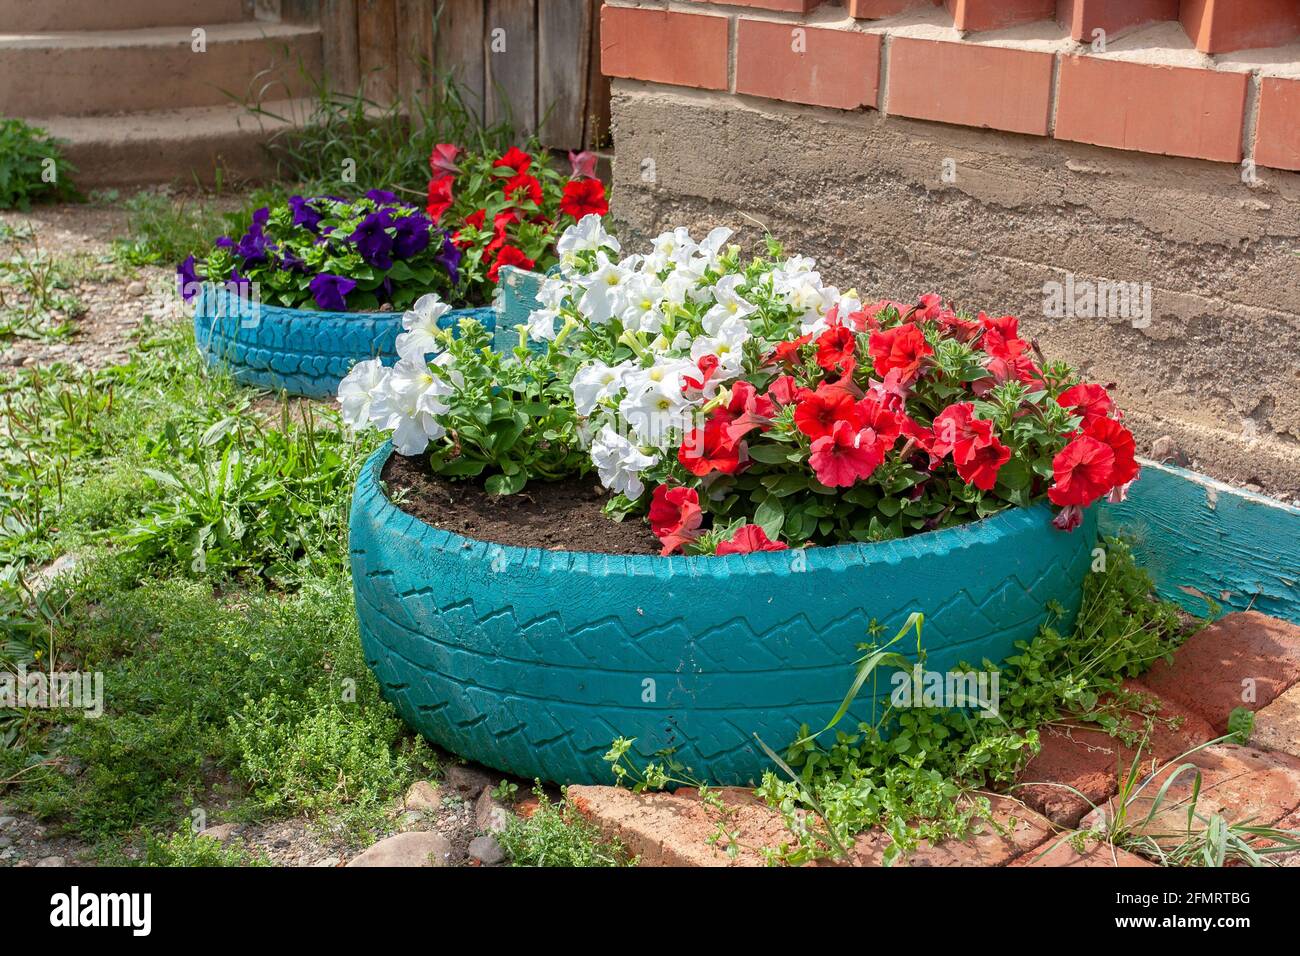 Two petunia flower beds made in old car tires next to house. Horizontal image. Stock Photo